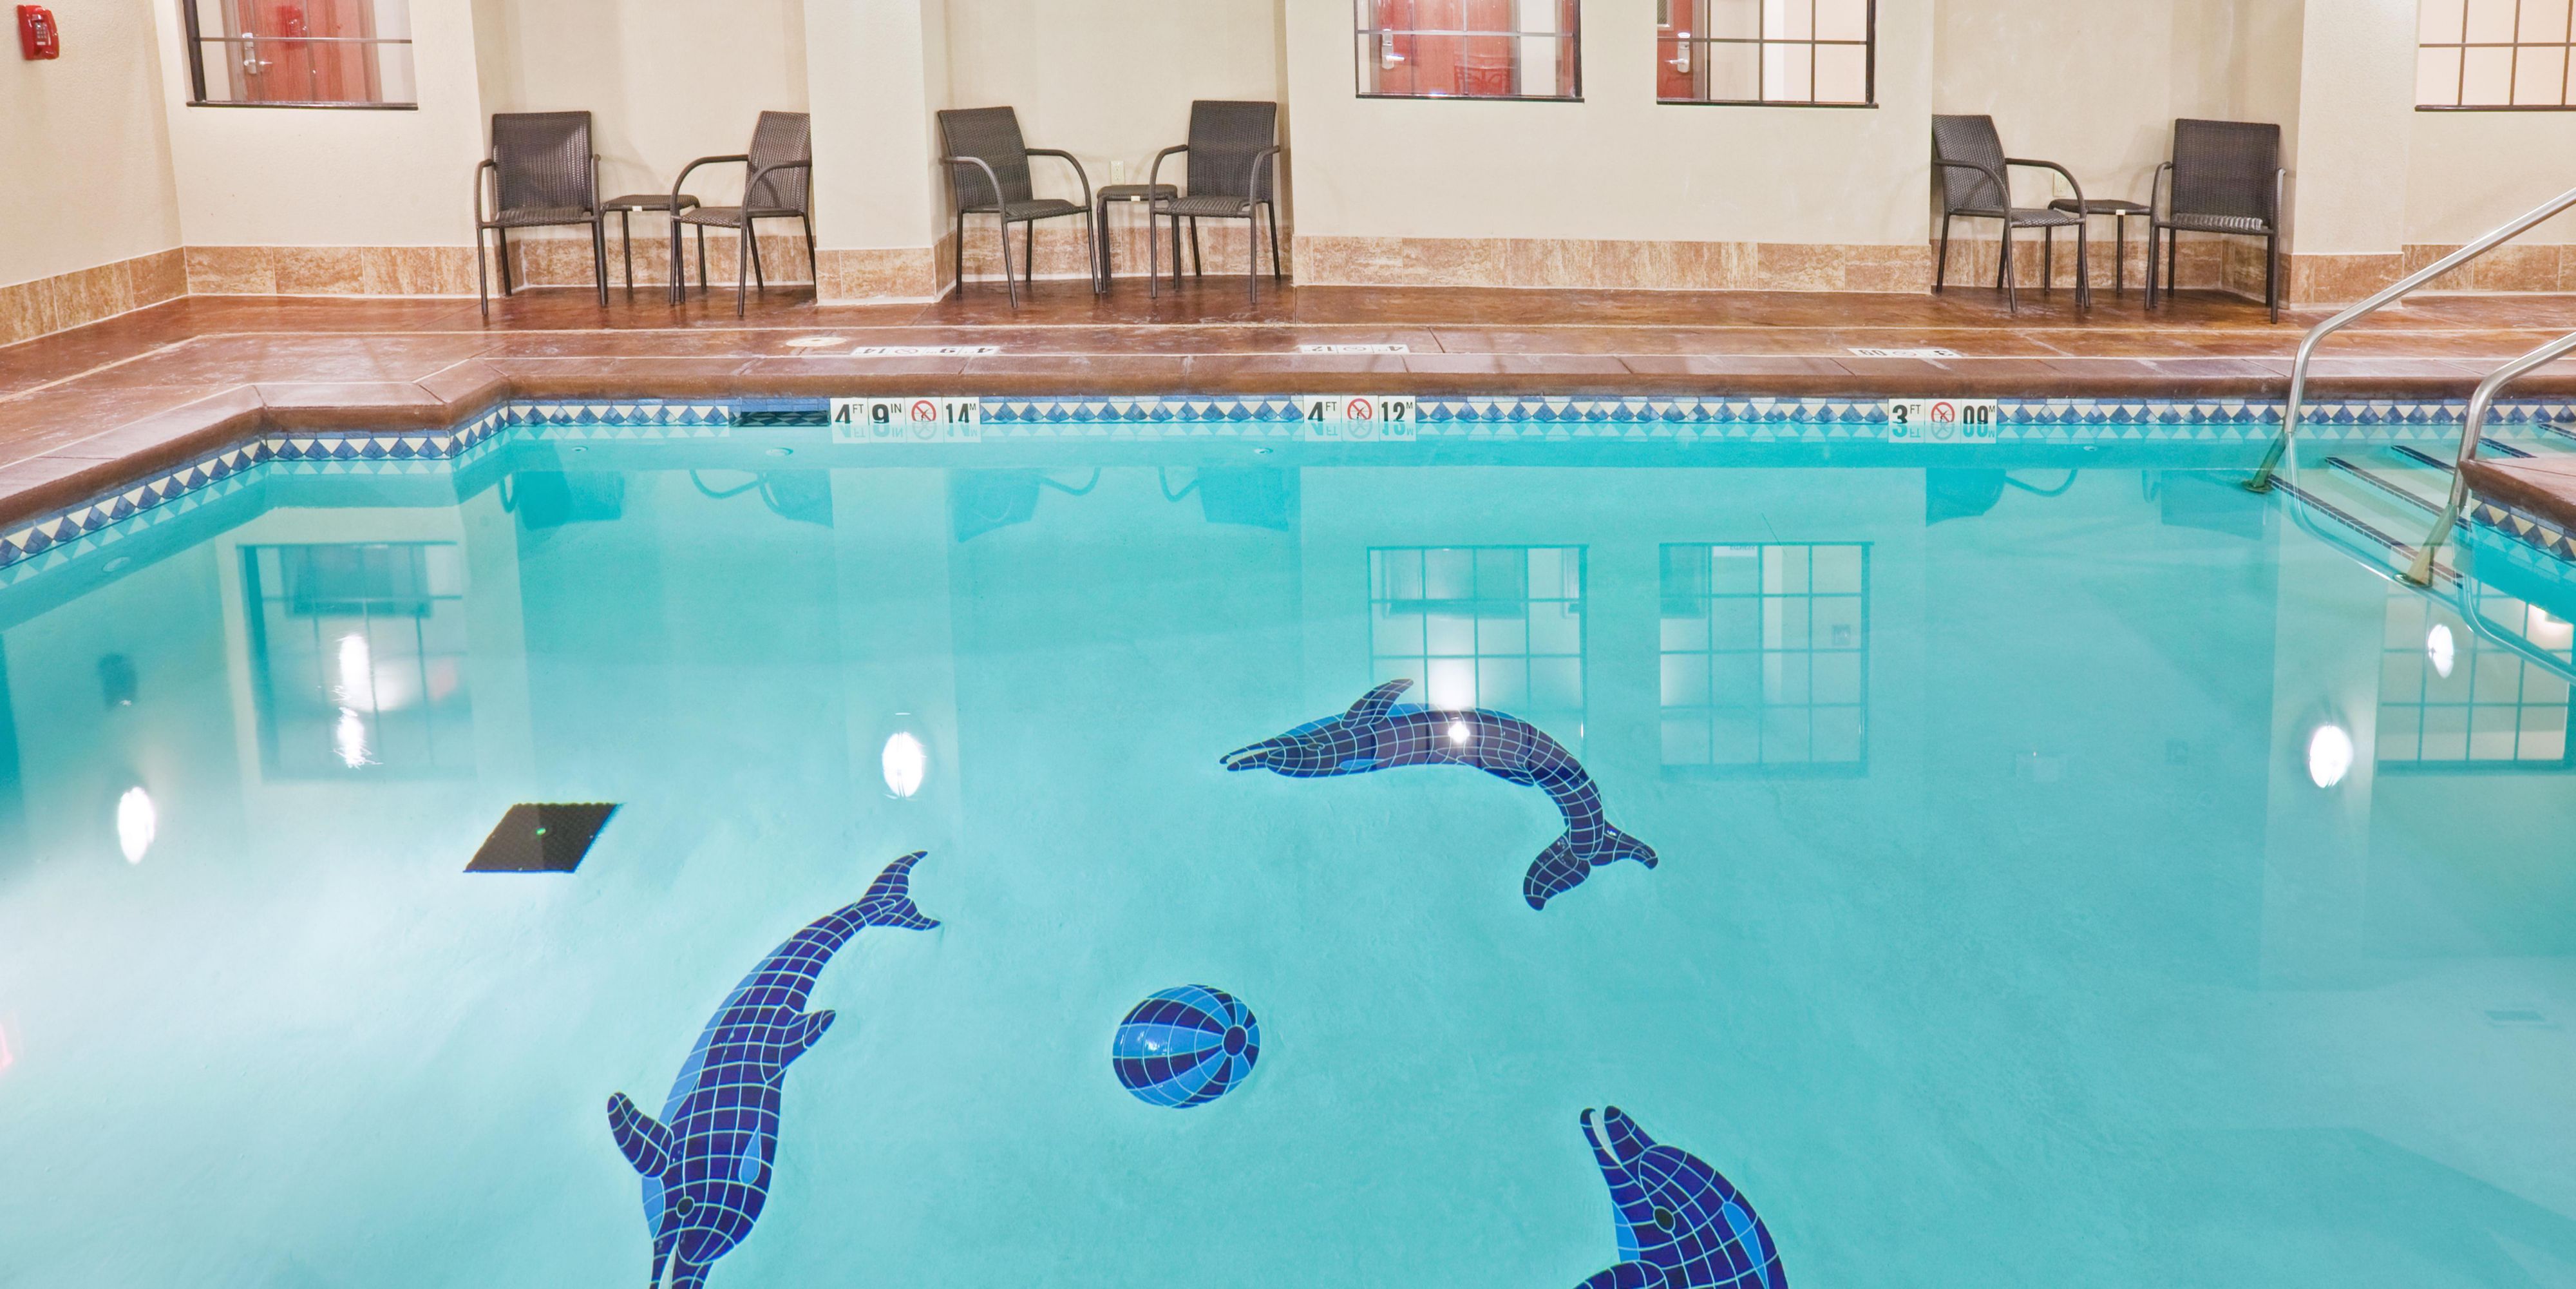 Doesn't matter if it's 115 degrees or 5 below 0, we've got you covered! Hop into our indoor pool and spa year around to exercise, have fun with the family or just relax.
